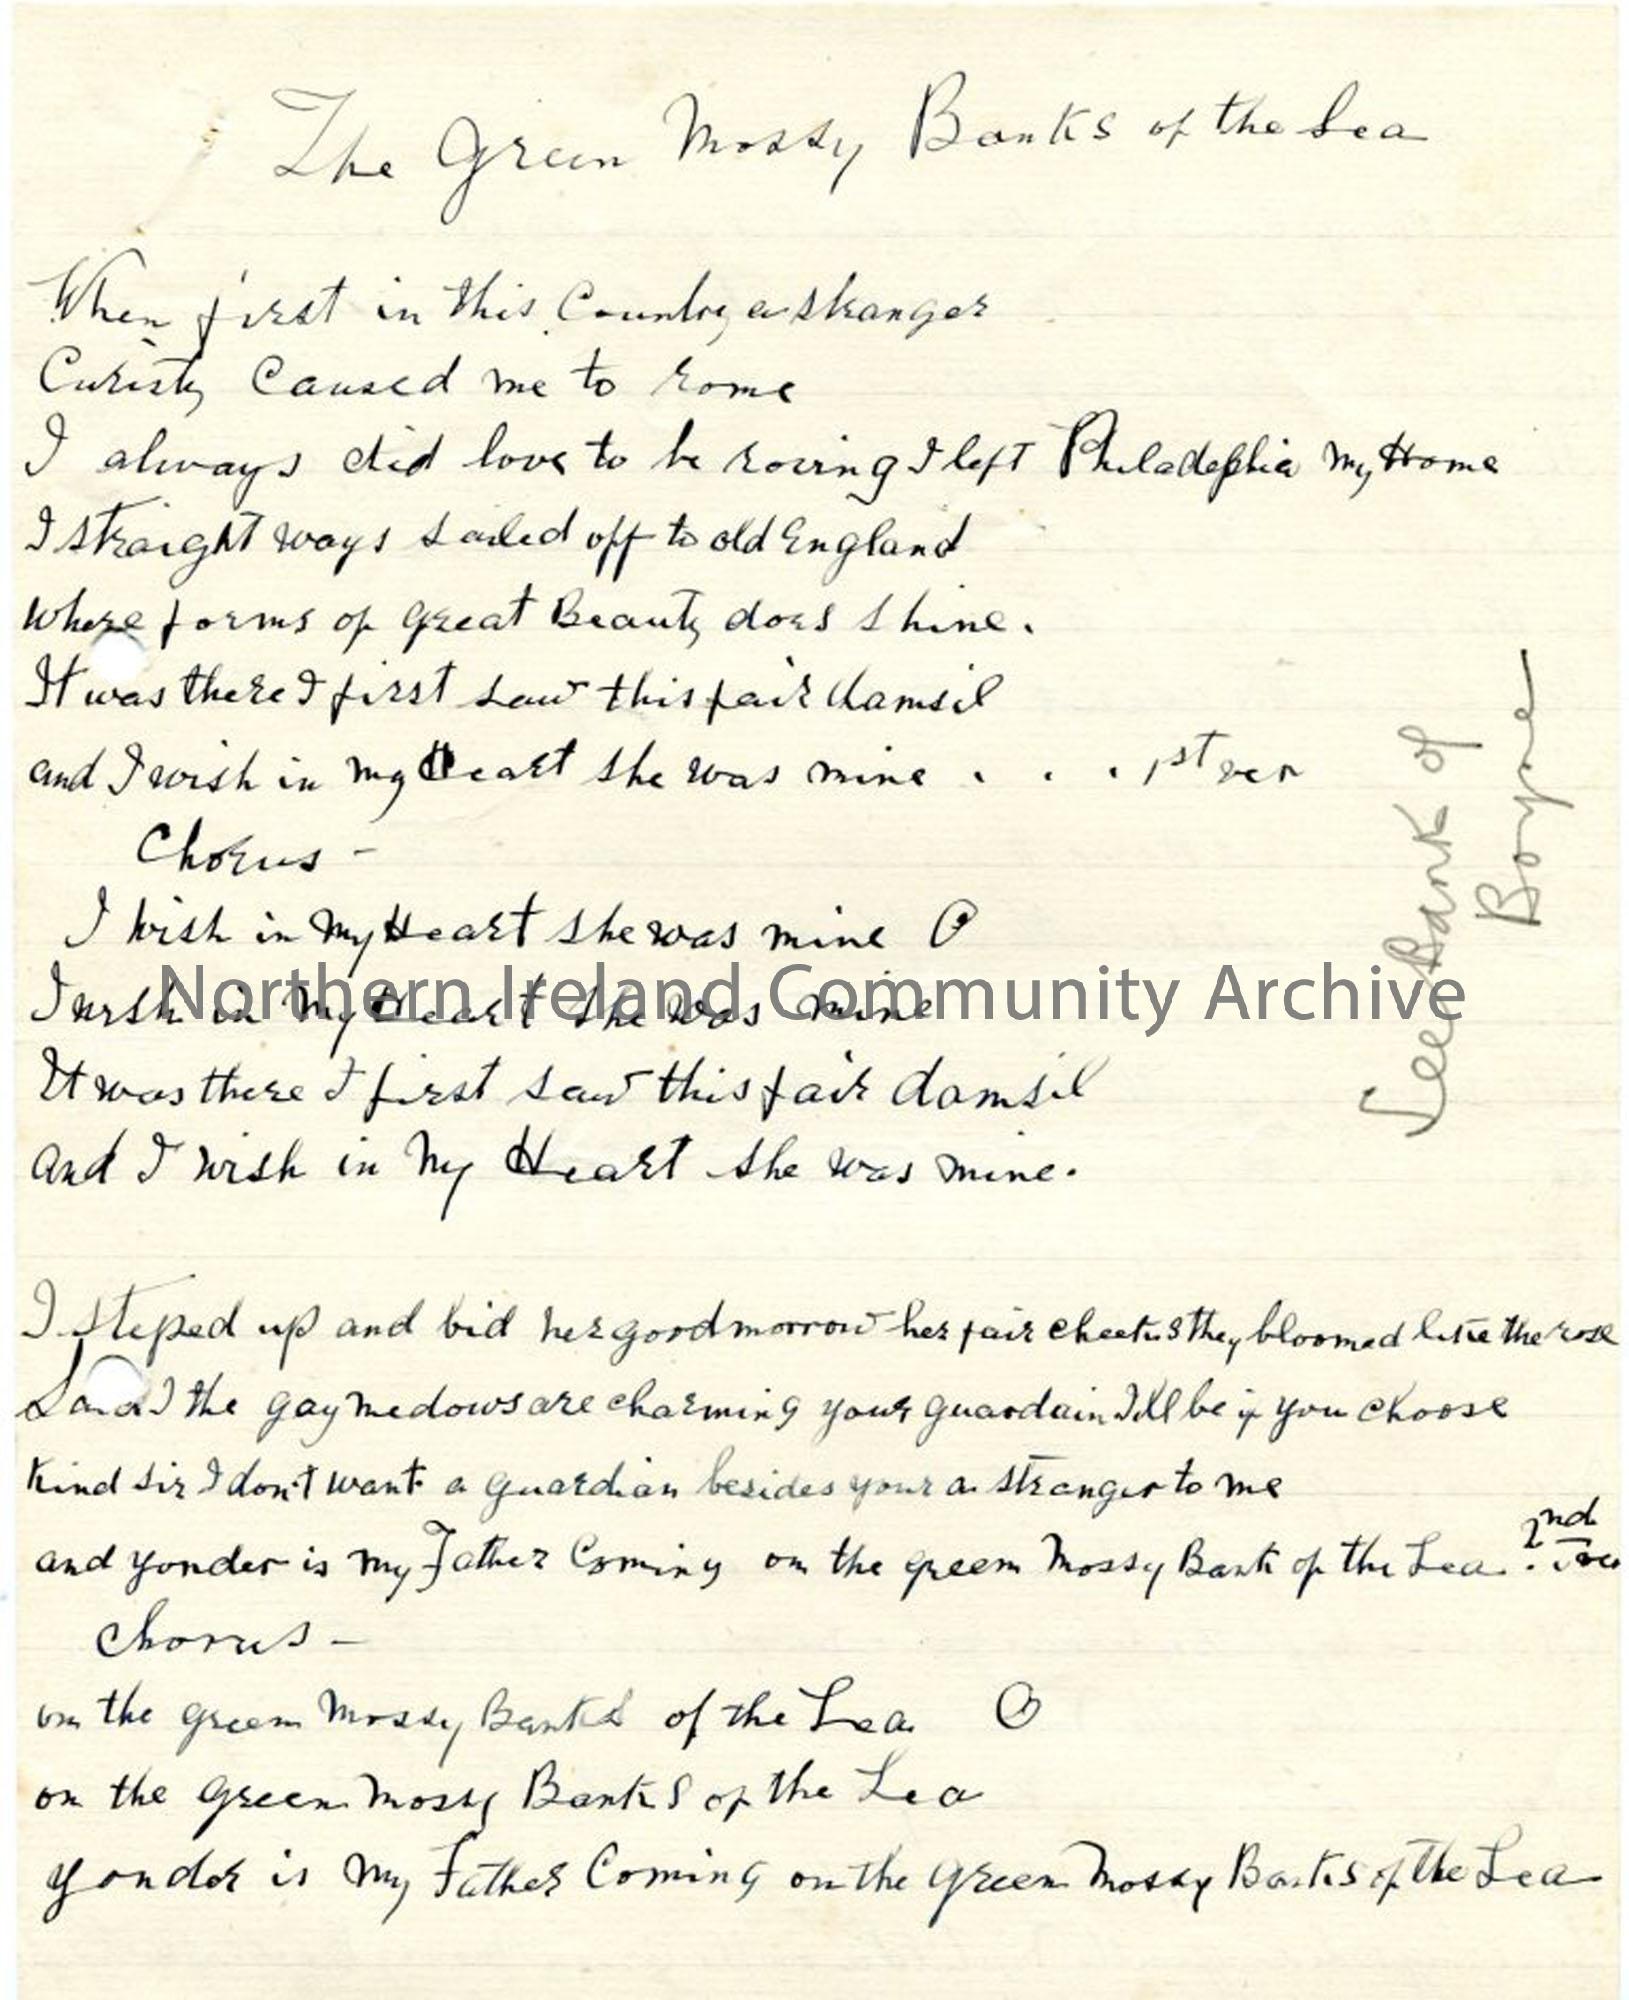 Page 1 – Handwritten words to ‘The Green Mossy Banks of the Lea’